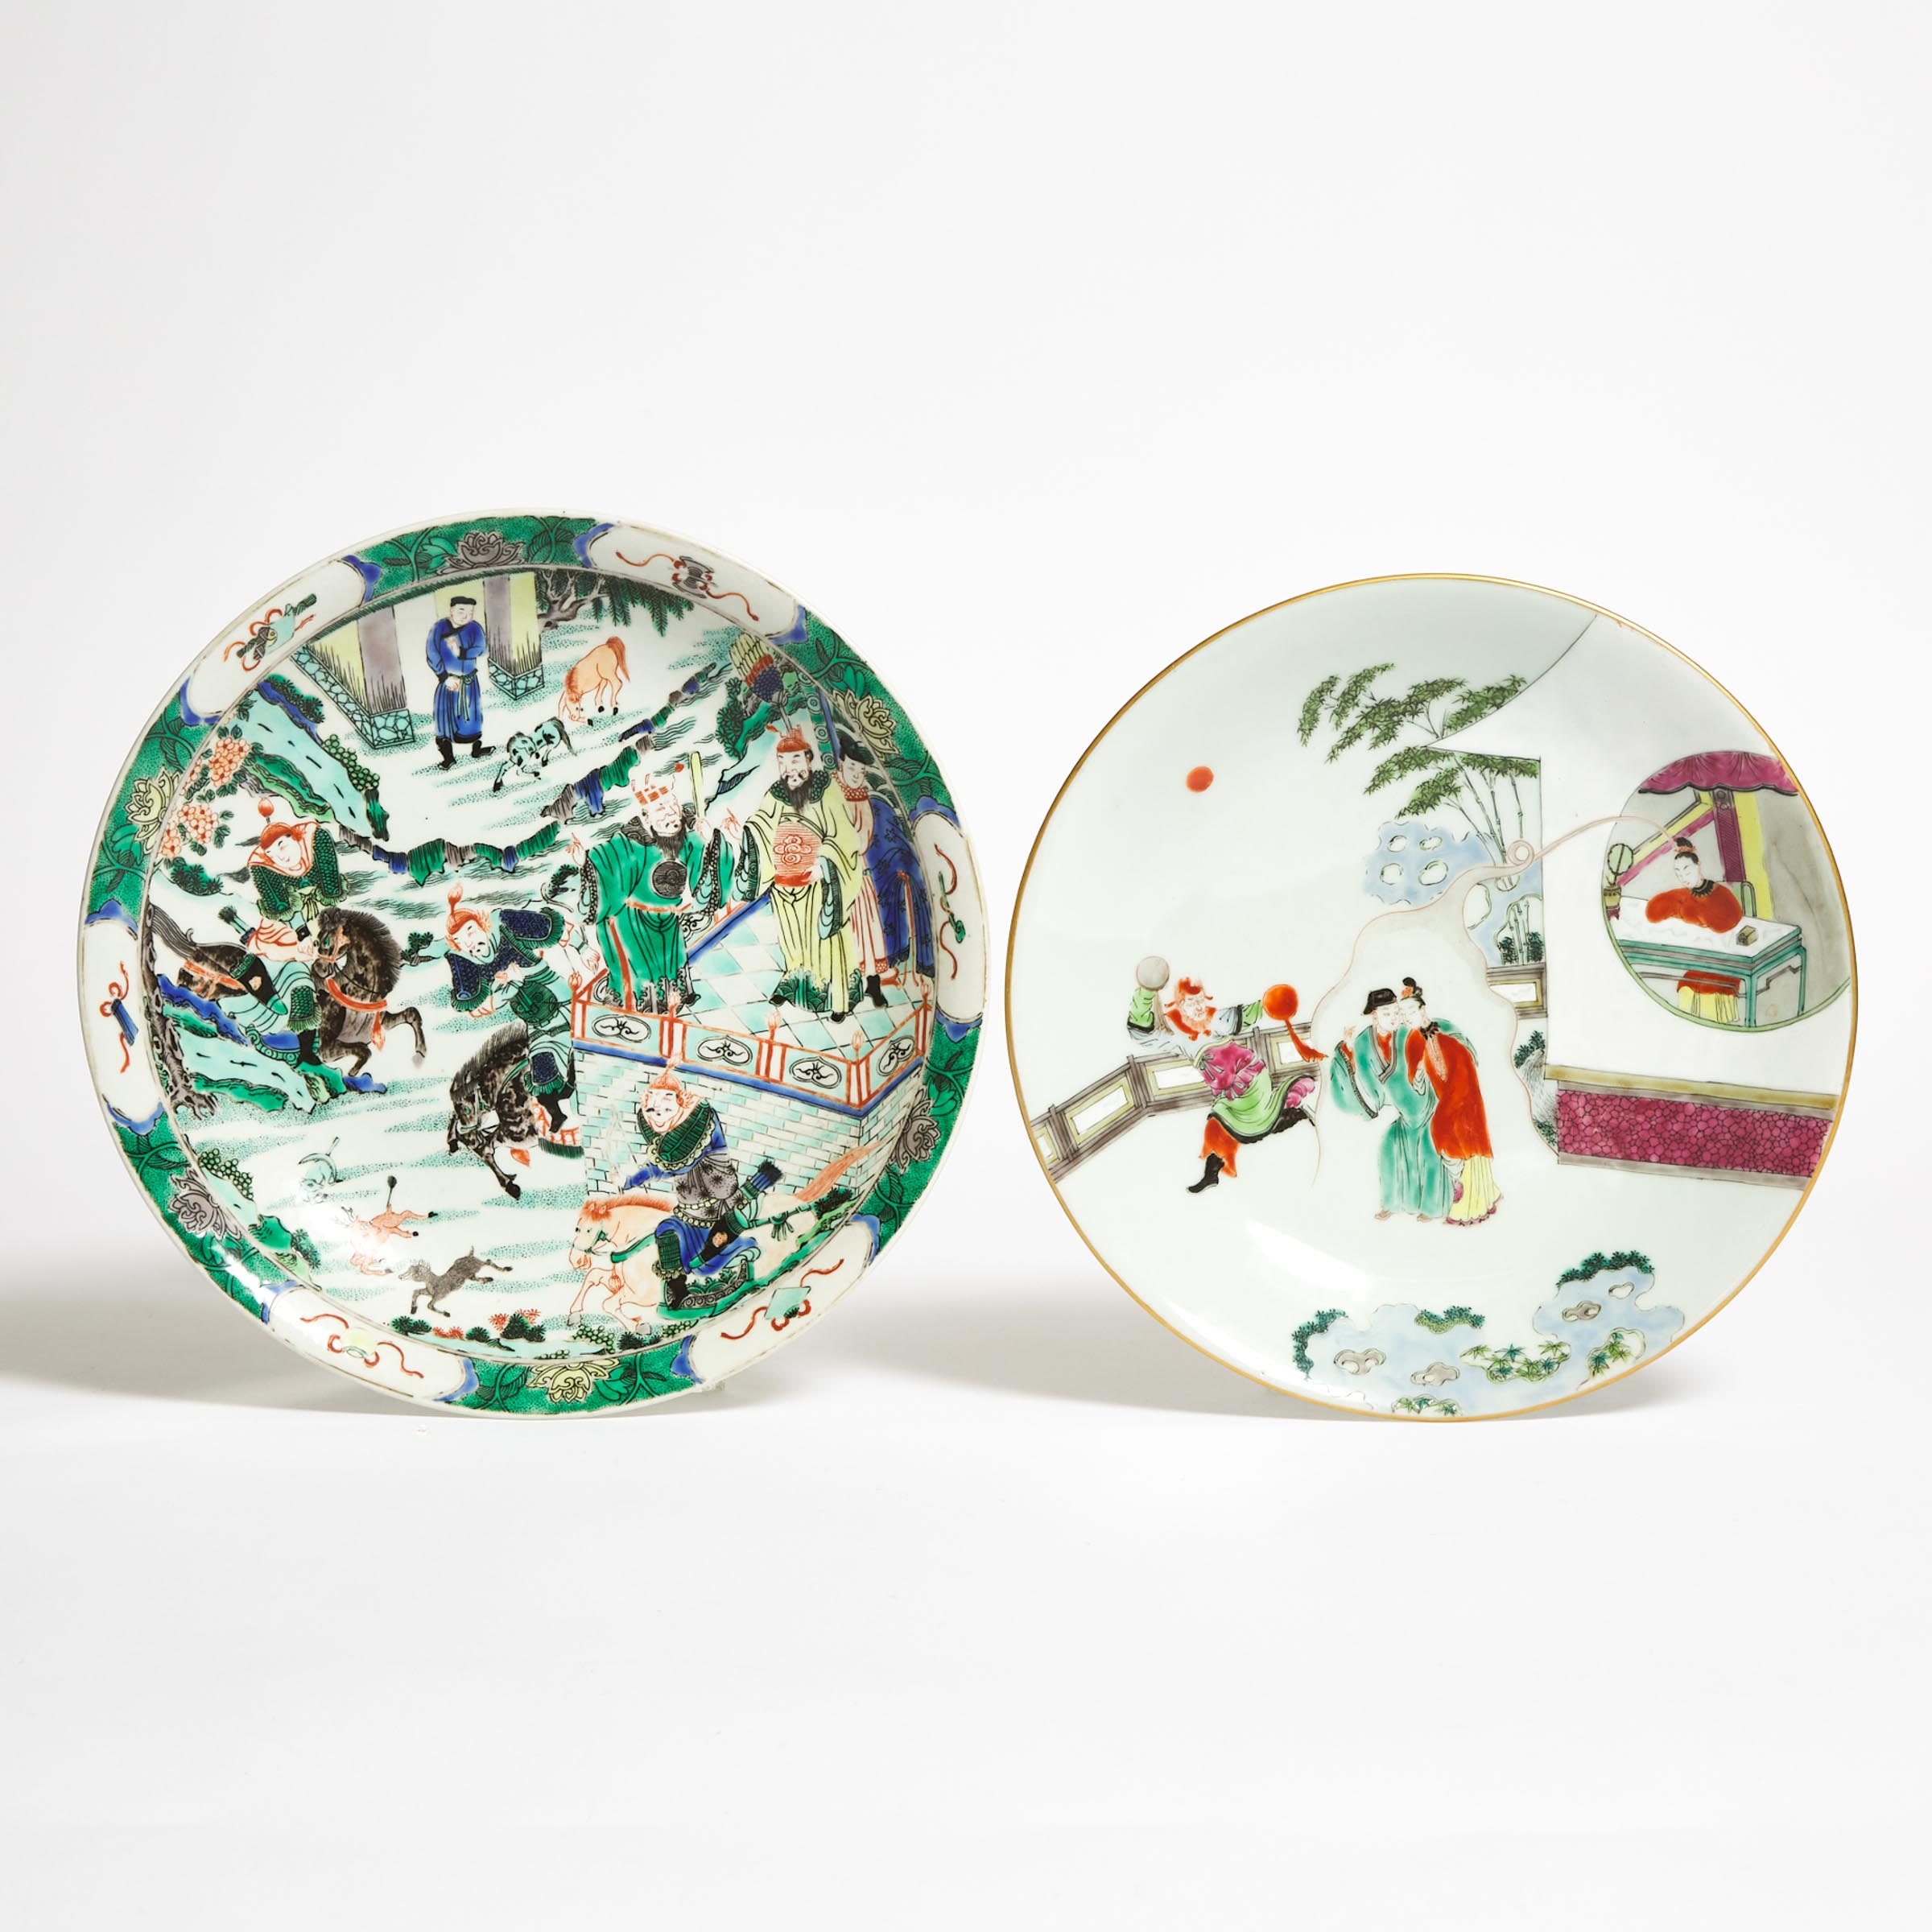 A Kangxi-Style Famille Verte Dish, Together With an Enameled 'Romance of the Western Chamber' Dish, 20th Century